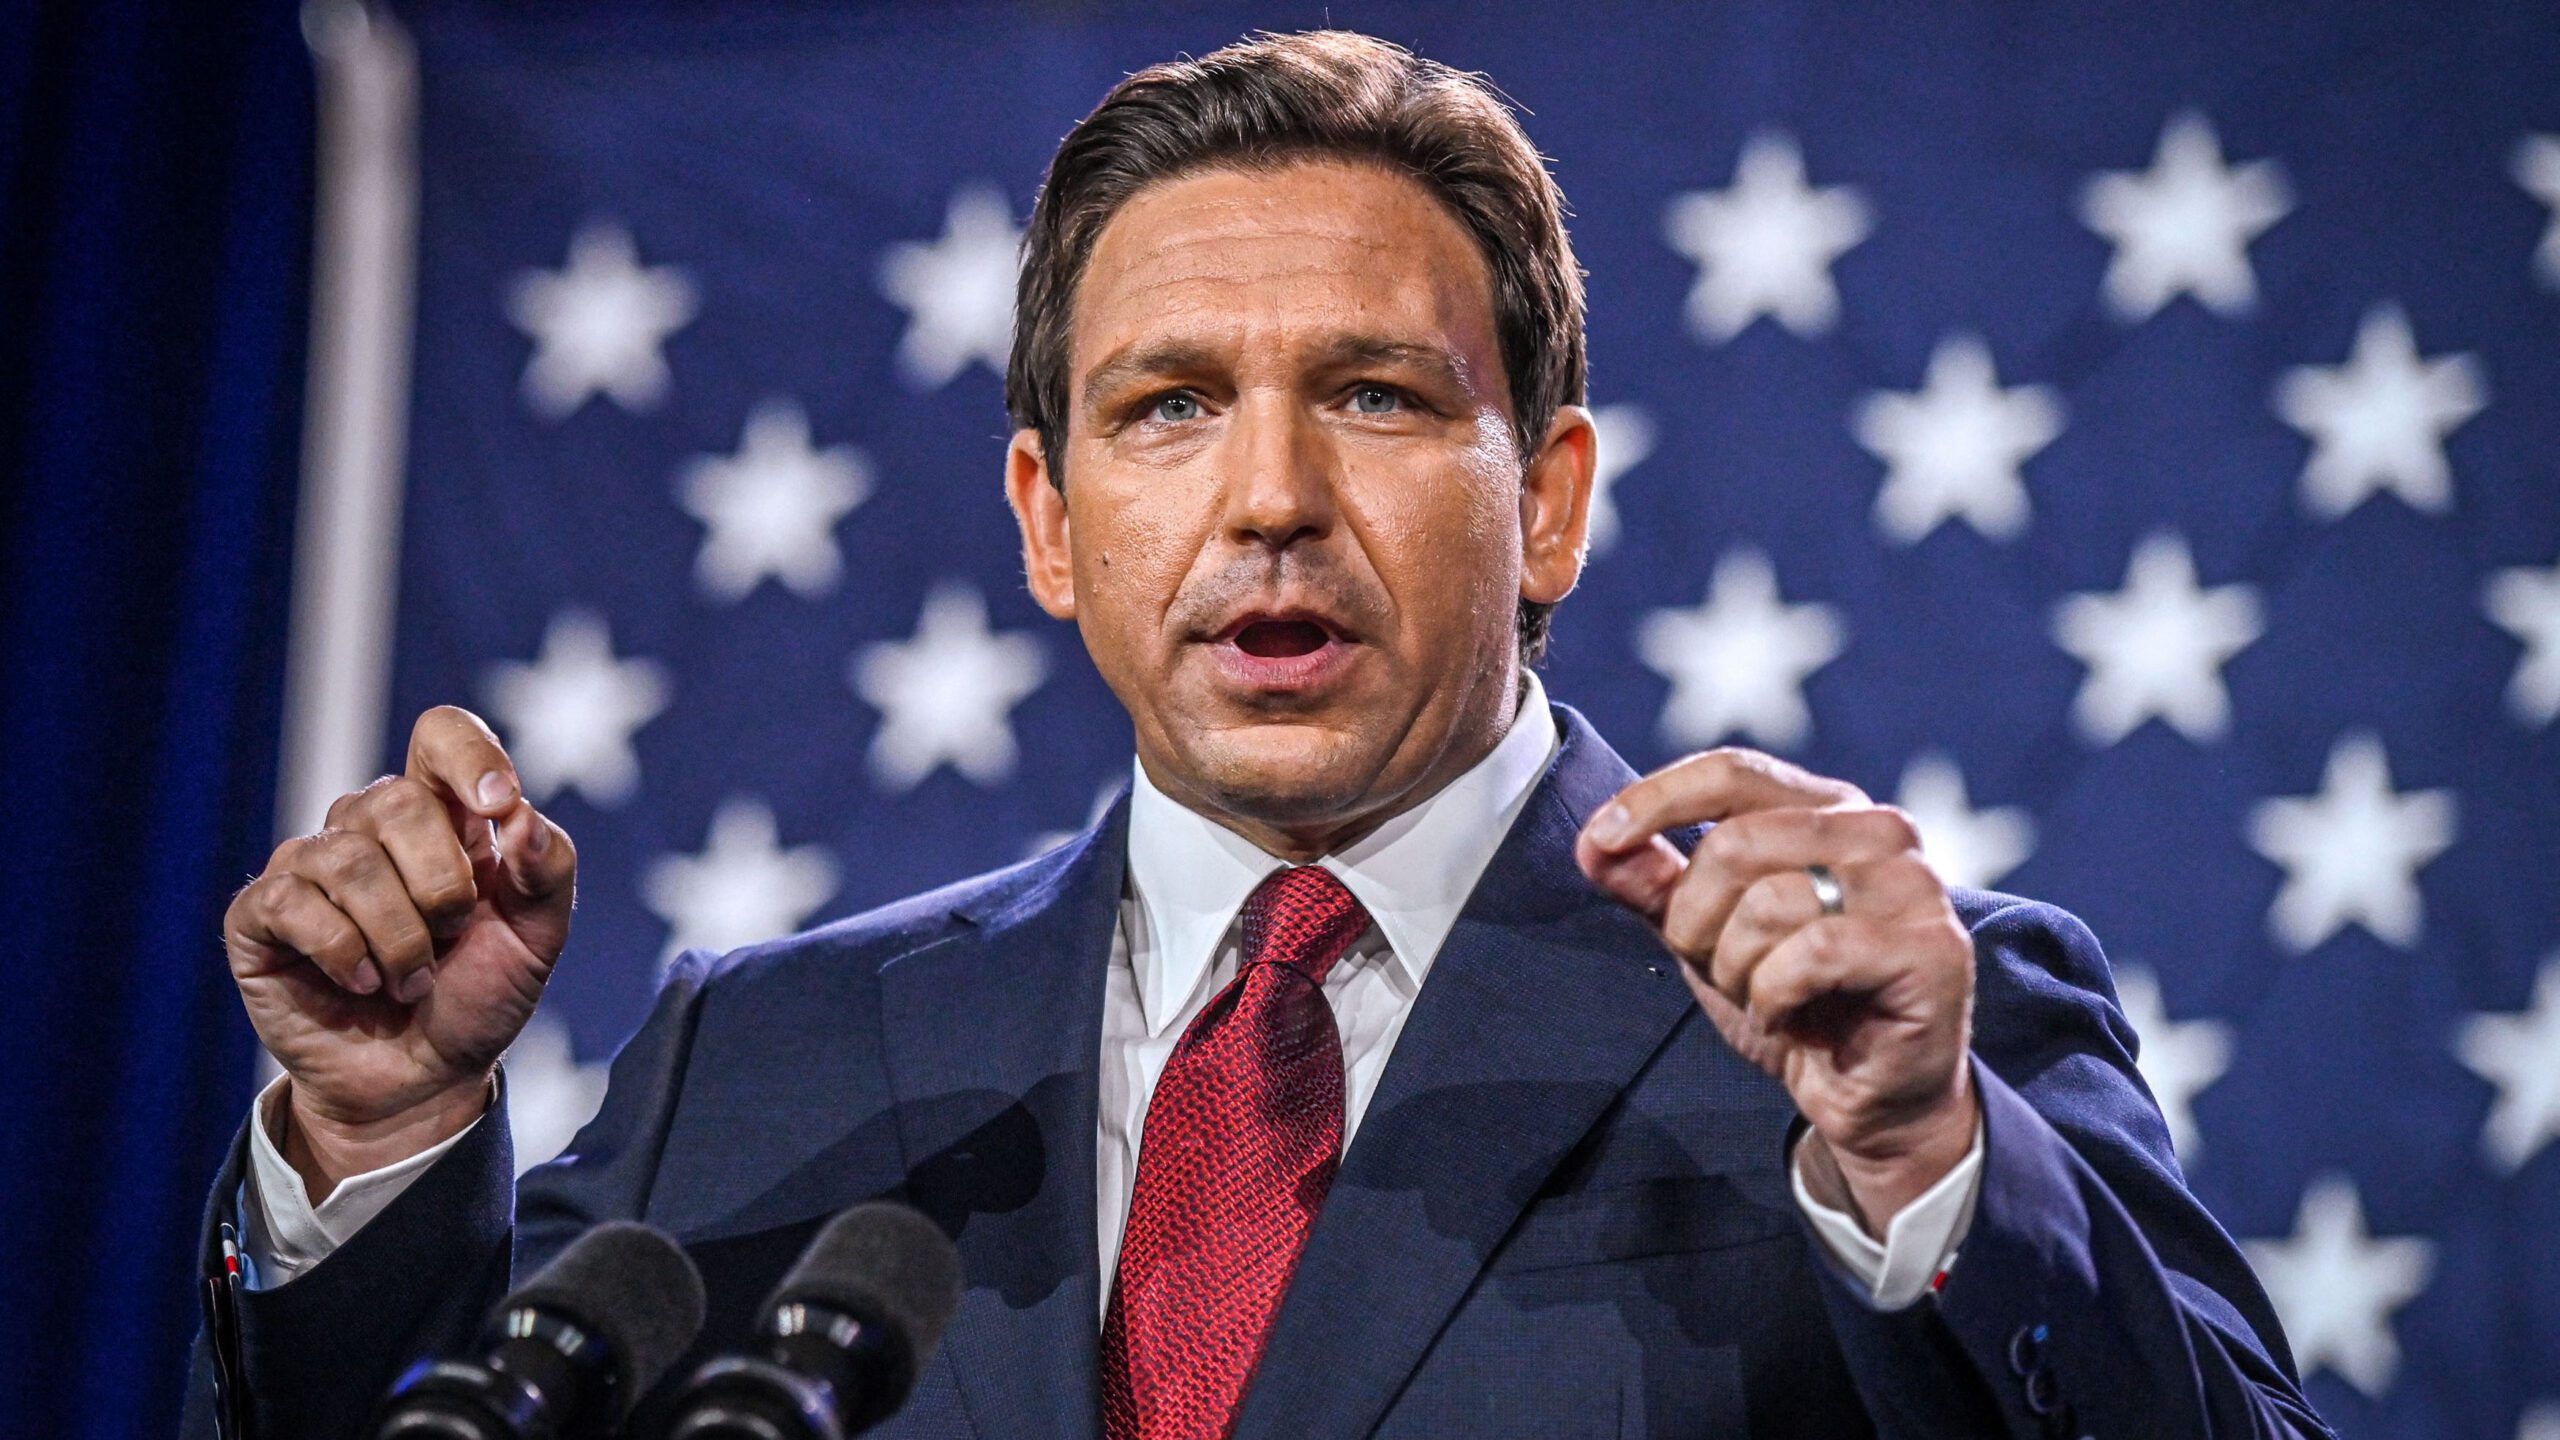 desantis-responds-directly-to-trump’s-attacks-on-florida’s-handling-of-pandemic